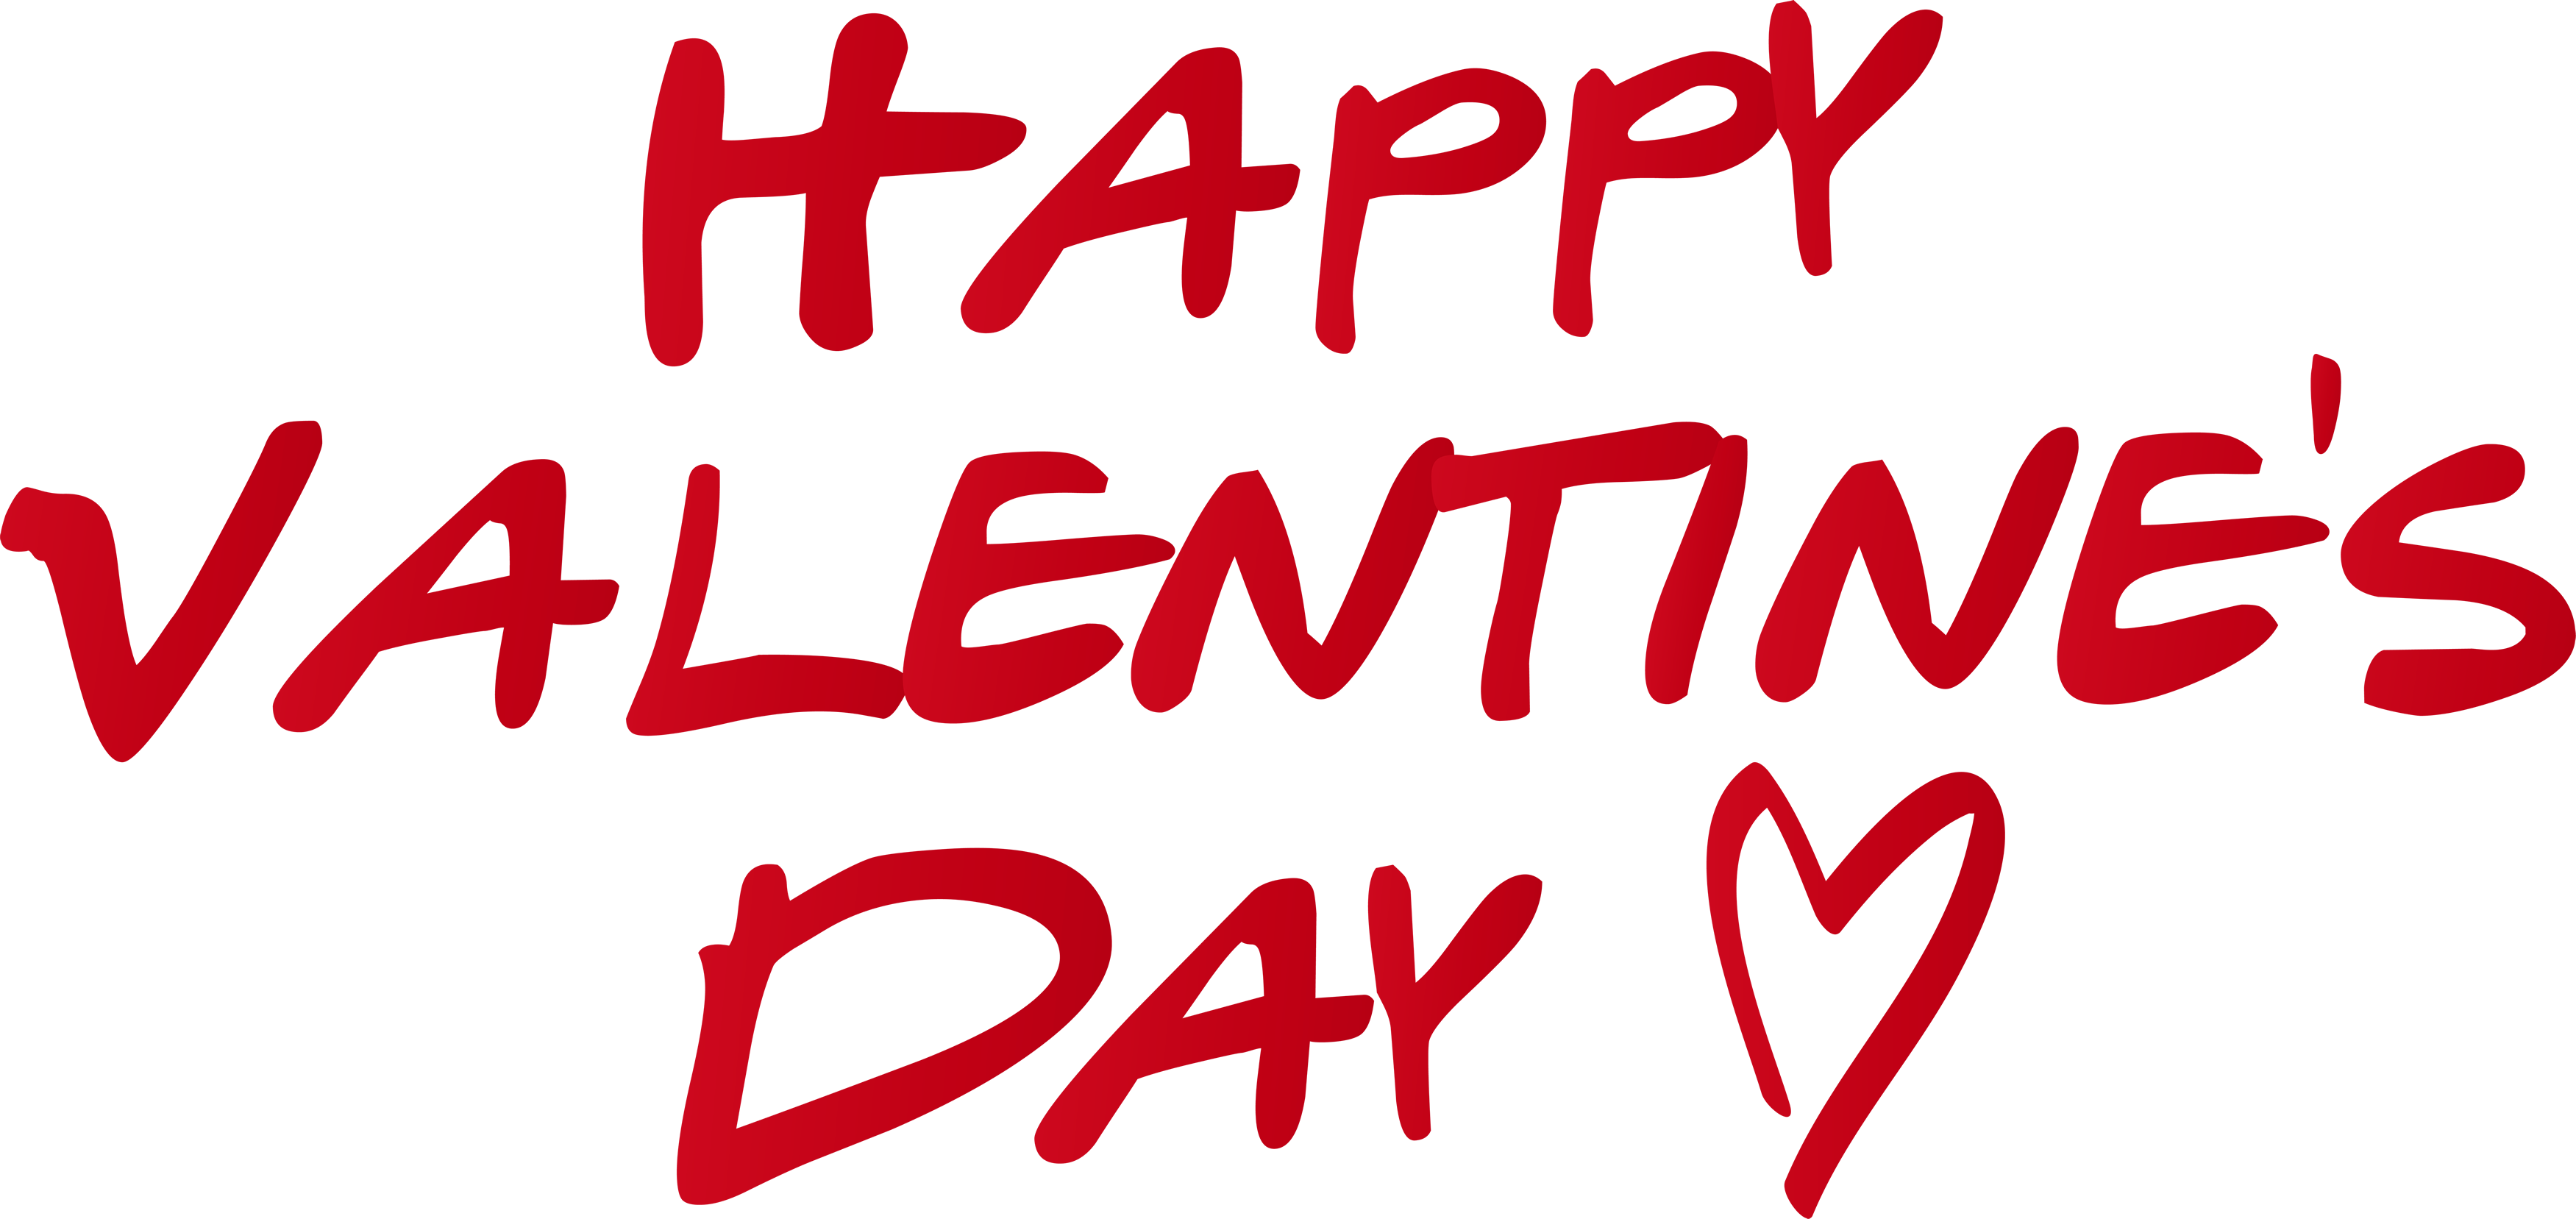 Happy Valentines Day Png Hd - Happy Valentines Day Png Hd Hdpng.com 3502, Transparent background PNG HD thumbnail